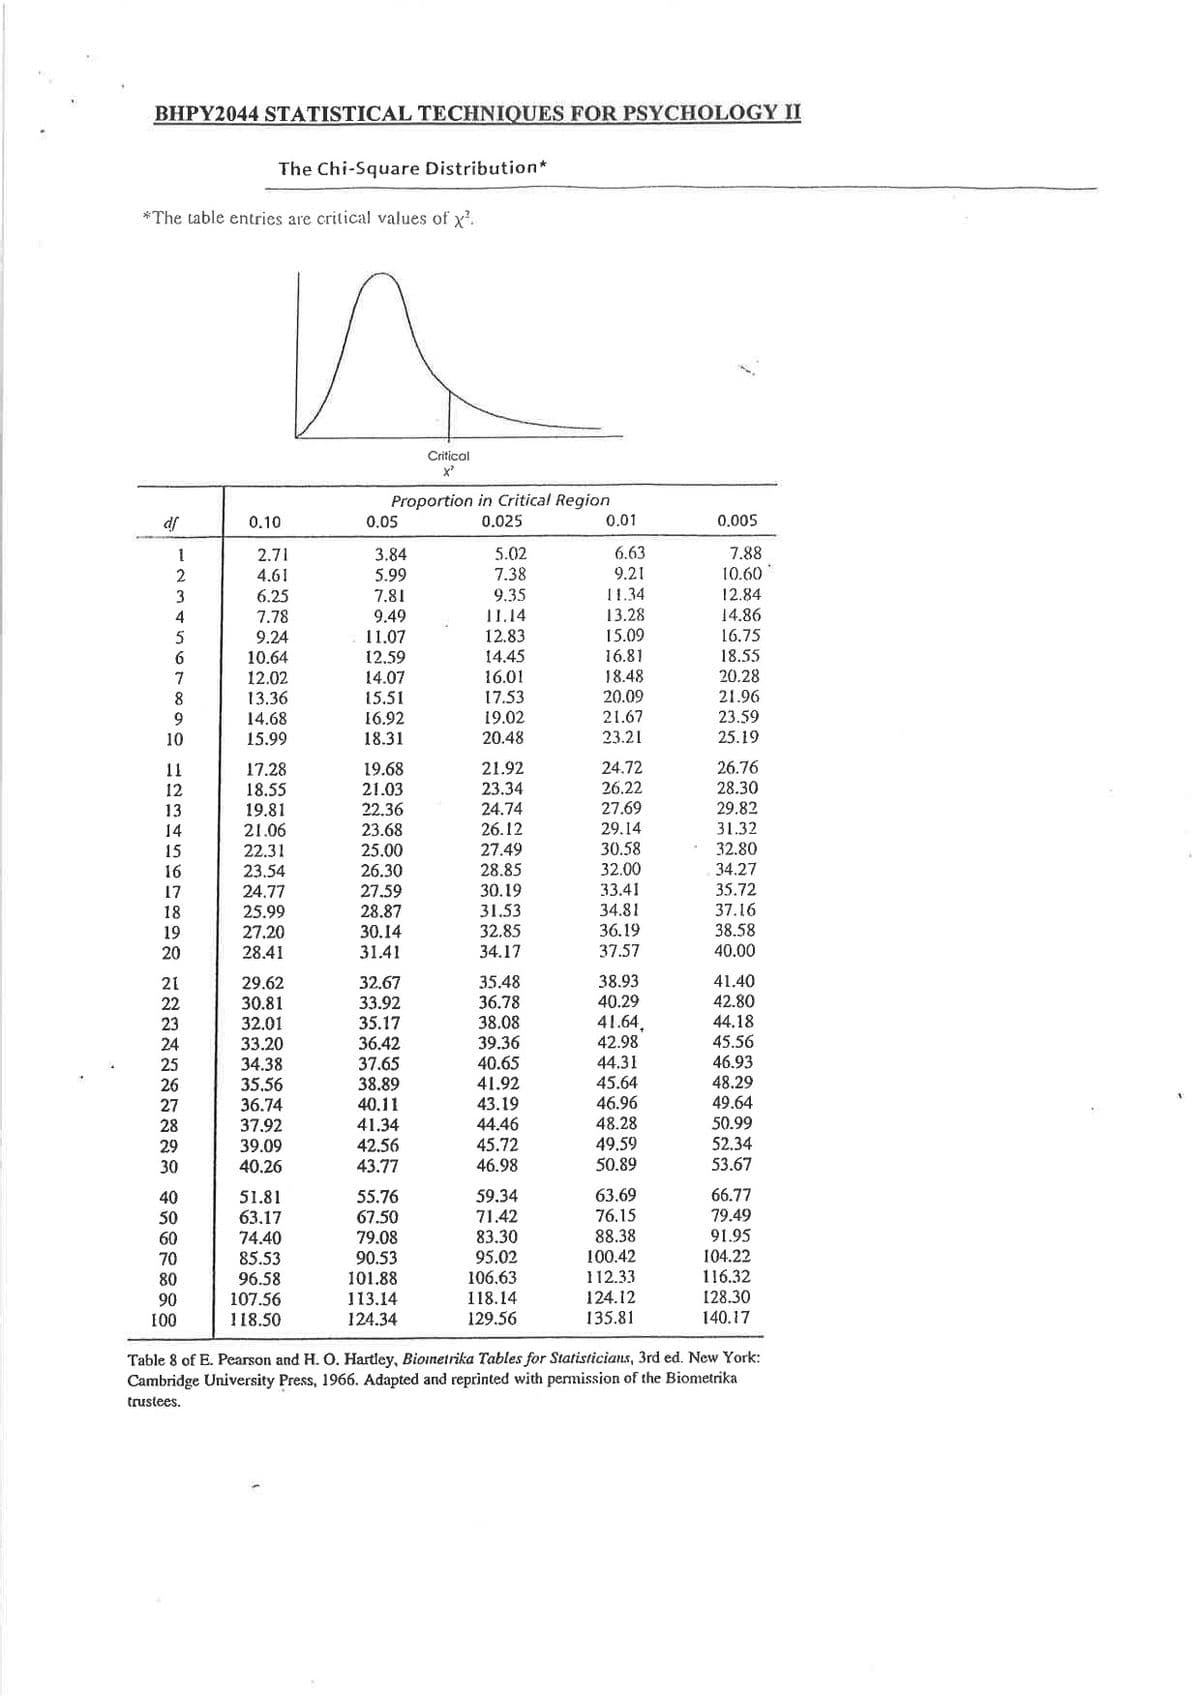 BHPY2044 STATISTICAL TECHNIQUES FOR PSYCHOLOGY II
The Chi-Square Distribution*
*The table entries are critical values of x.
Critical
Proportion in Critical Region
0.025
df
0.10
0.05
0.01
0.005
5.02
7.38
6.63
7.88
2.71
4.61
3.84
9.21
10.60
5.99
7.81
2
3
6.25
9.35
I 1.34
12.84
7.78
11.14
13.28
14.86
9.49
11.07
4
5
9.24
12.83
15.09
16,75
14.45
16.81
18.55
10.64
12.02
13.36
12.59
14.07
15.51
7
16.01
18.48
20.28
17.53
20.09
21.96
19.02
21.67
23.59
16.92
18.31
9
14.68
10
15.99
20.48
23.21
25.19
26.76
28.30
29.82
19.68
21.92
24.72
17.28
18.55
19.81
21.06
11
12
21.03
23.34
26.22
24.74
27.69
22.36
23.68
13
14
26.12
29.14
31.32
30.58
32.00
32.80
25.00
26.30
27.49
28.85
15
22.31
16
23.54
34.27
17
24.77
27.59
30.19
33.41
35.72
37.16
38.58
18
25.99
28.87
31.53
34.81
36.19
30.14
31.41
19
27.20
32.85
20
28.41
34.17
37.57
40.00
38.93
40.29
41.40
32.67
33.92
35.17
36.42
37.65
38.89
40,11
41.34
42.56
43.77
35.48
36.78
38.08
39.36
40.65
41.92
43.19
21
29.62
30.81
32.01
42.80
44.18
22
41.64,
42.98
44.31
23
33.20
34.38
35.56
36.74
37.92
39.09
45.56
46.93
48.29
49.64
24
25
26
27
45.64
46.96
48.28
50.99
52.34
53.67
28
44.46
49.59
50.89
29
45.72
30
40.26
46.98
63.69
66.77
59.34
71.42
83.30
95.02
106.63
40
50
51.81
63.17
74.40
85.53
96.58
107.56
118.50
55.76
67.50
76.15
79.49
88.38
100.42
91.95
79.08
90.53
60
70
104.22
112.33
116.32
101.88
113.14
124.34
80
124.12
135.81
118.14
128.30
90
100
129.56
140.17
Table 8 of E. Pearson and H. O. Hartley, Bioinetrika Tables for Statisticians, 3rd ed. New York:
Cambridge University Press, 1966. Adapted and reprinted with permission of the Biometrika
trustees.
